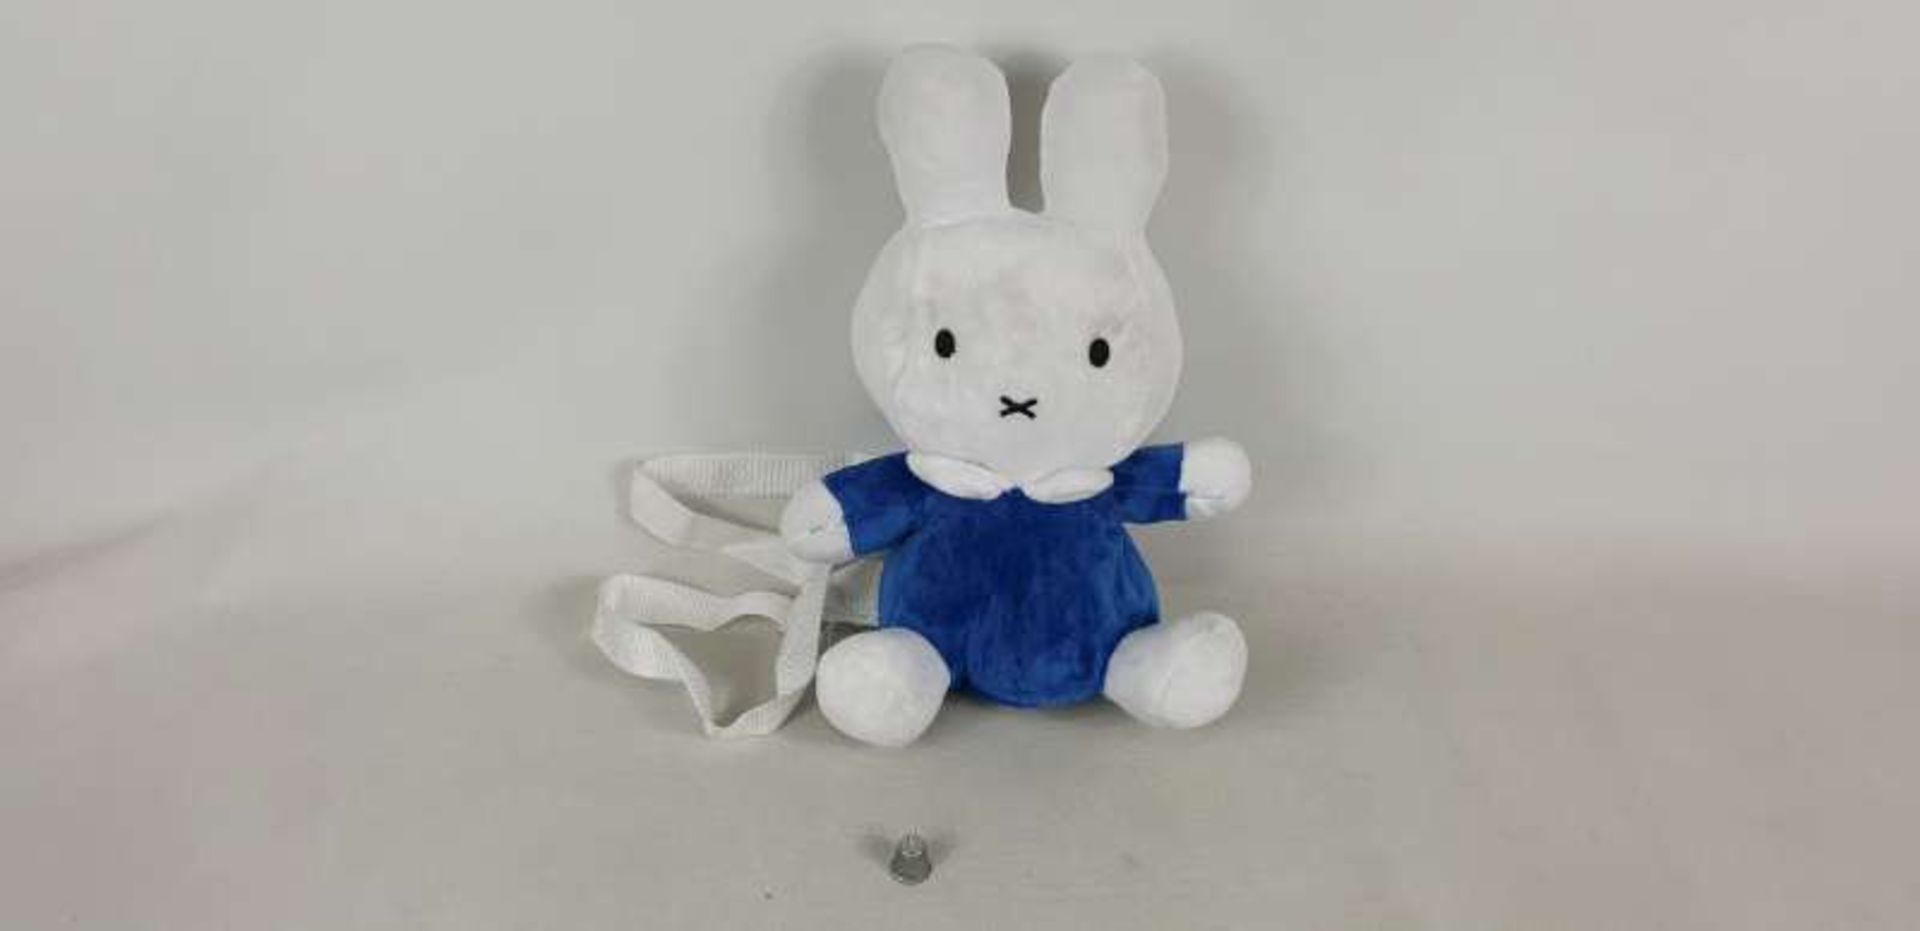 36 X MIFFY BLUE 3D BODY PLUSH BACKPACKS IN 3 BOXES